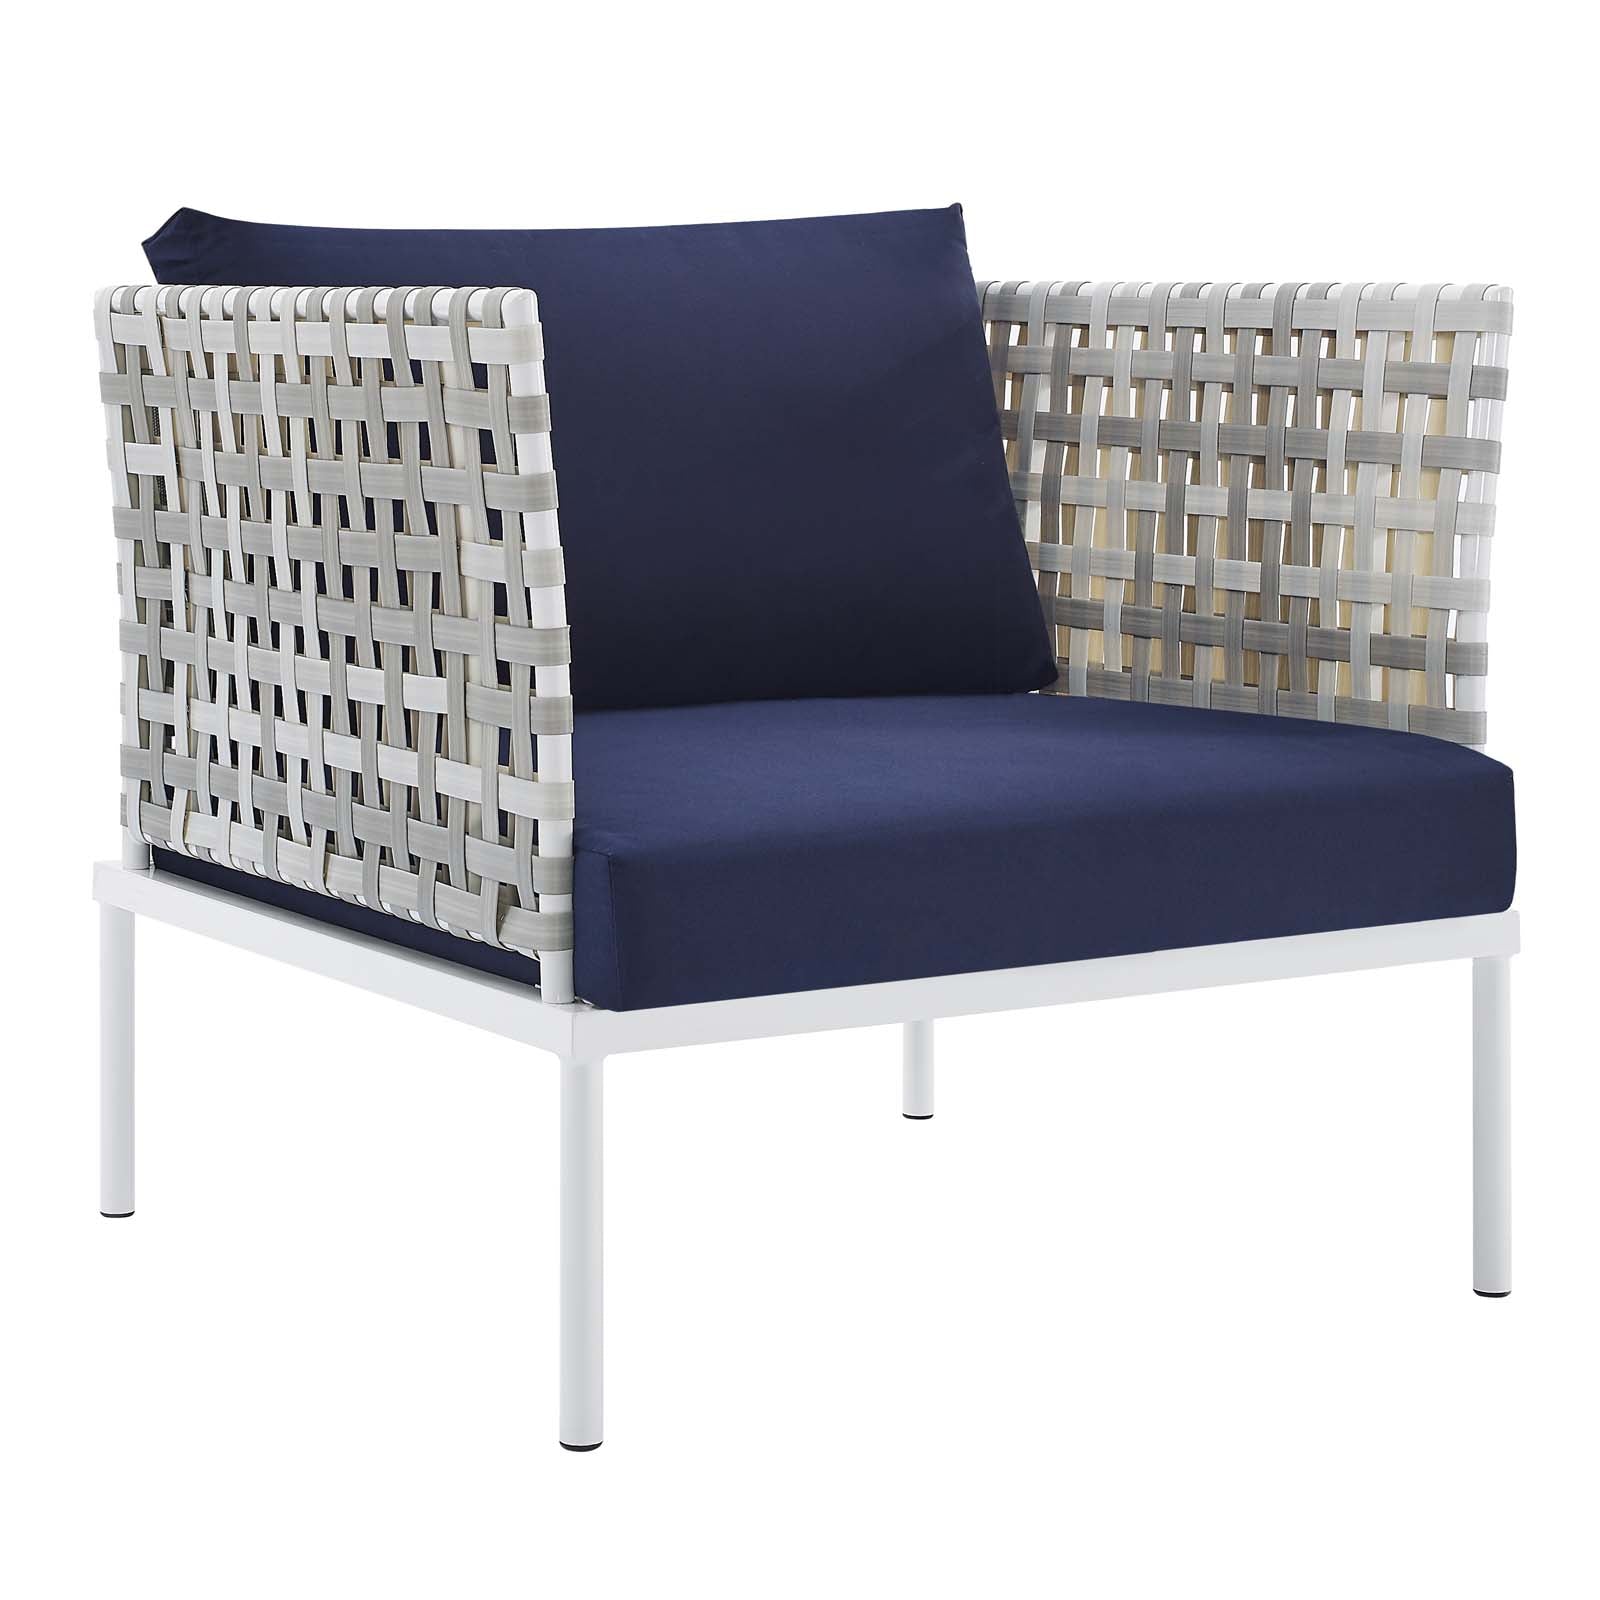 Modway Outdoor Chairs - Harmony Sunbrella Basket Weave Outdoor Patio Aluminum Armchair Taupe Navy